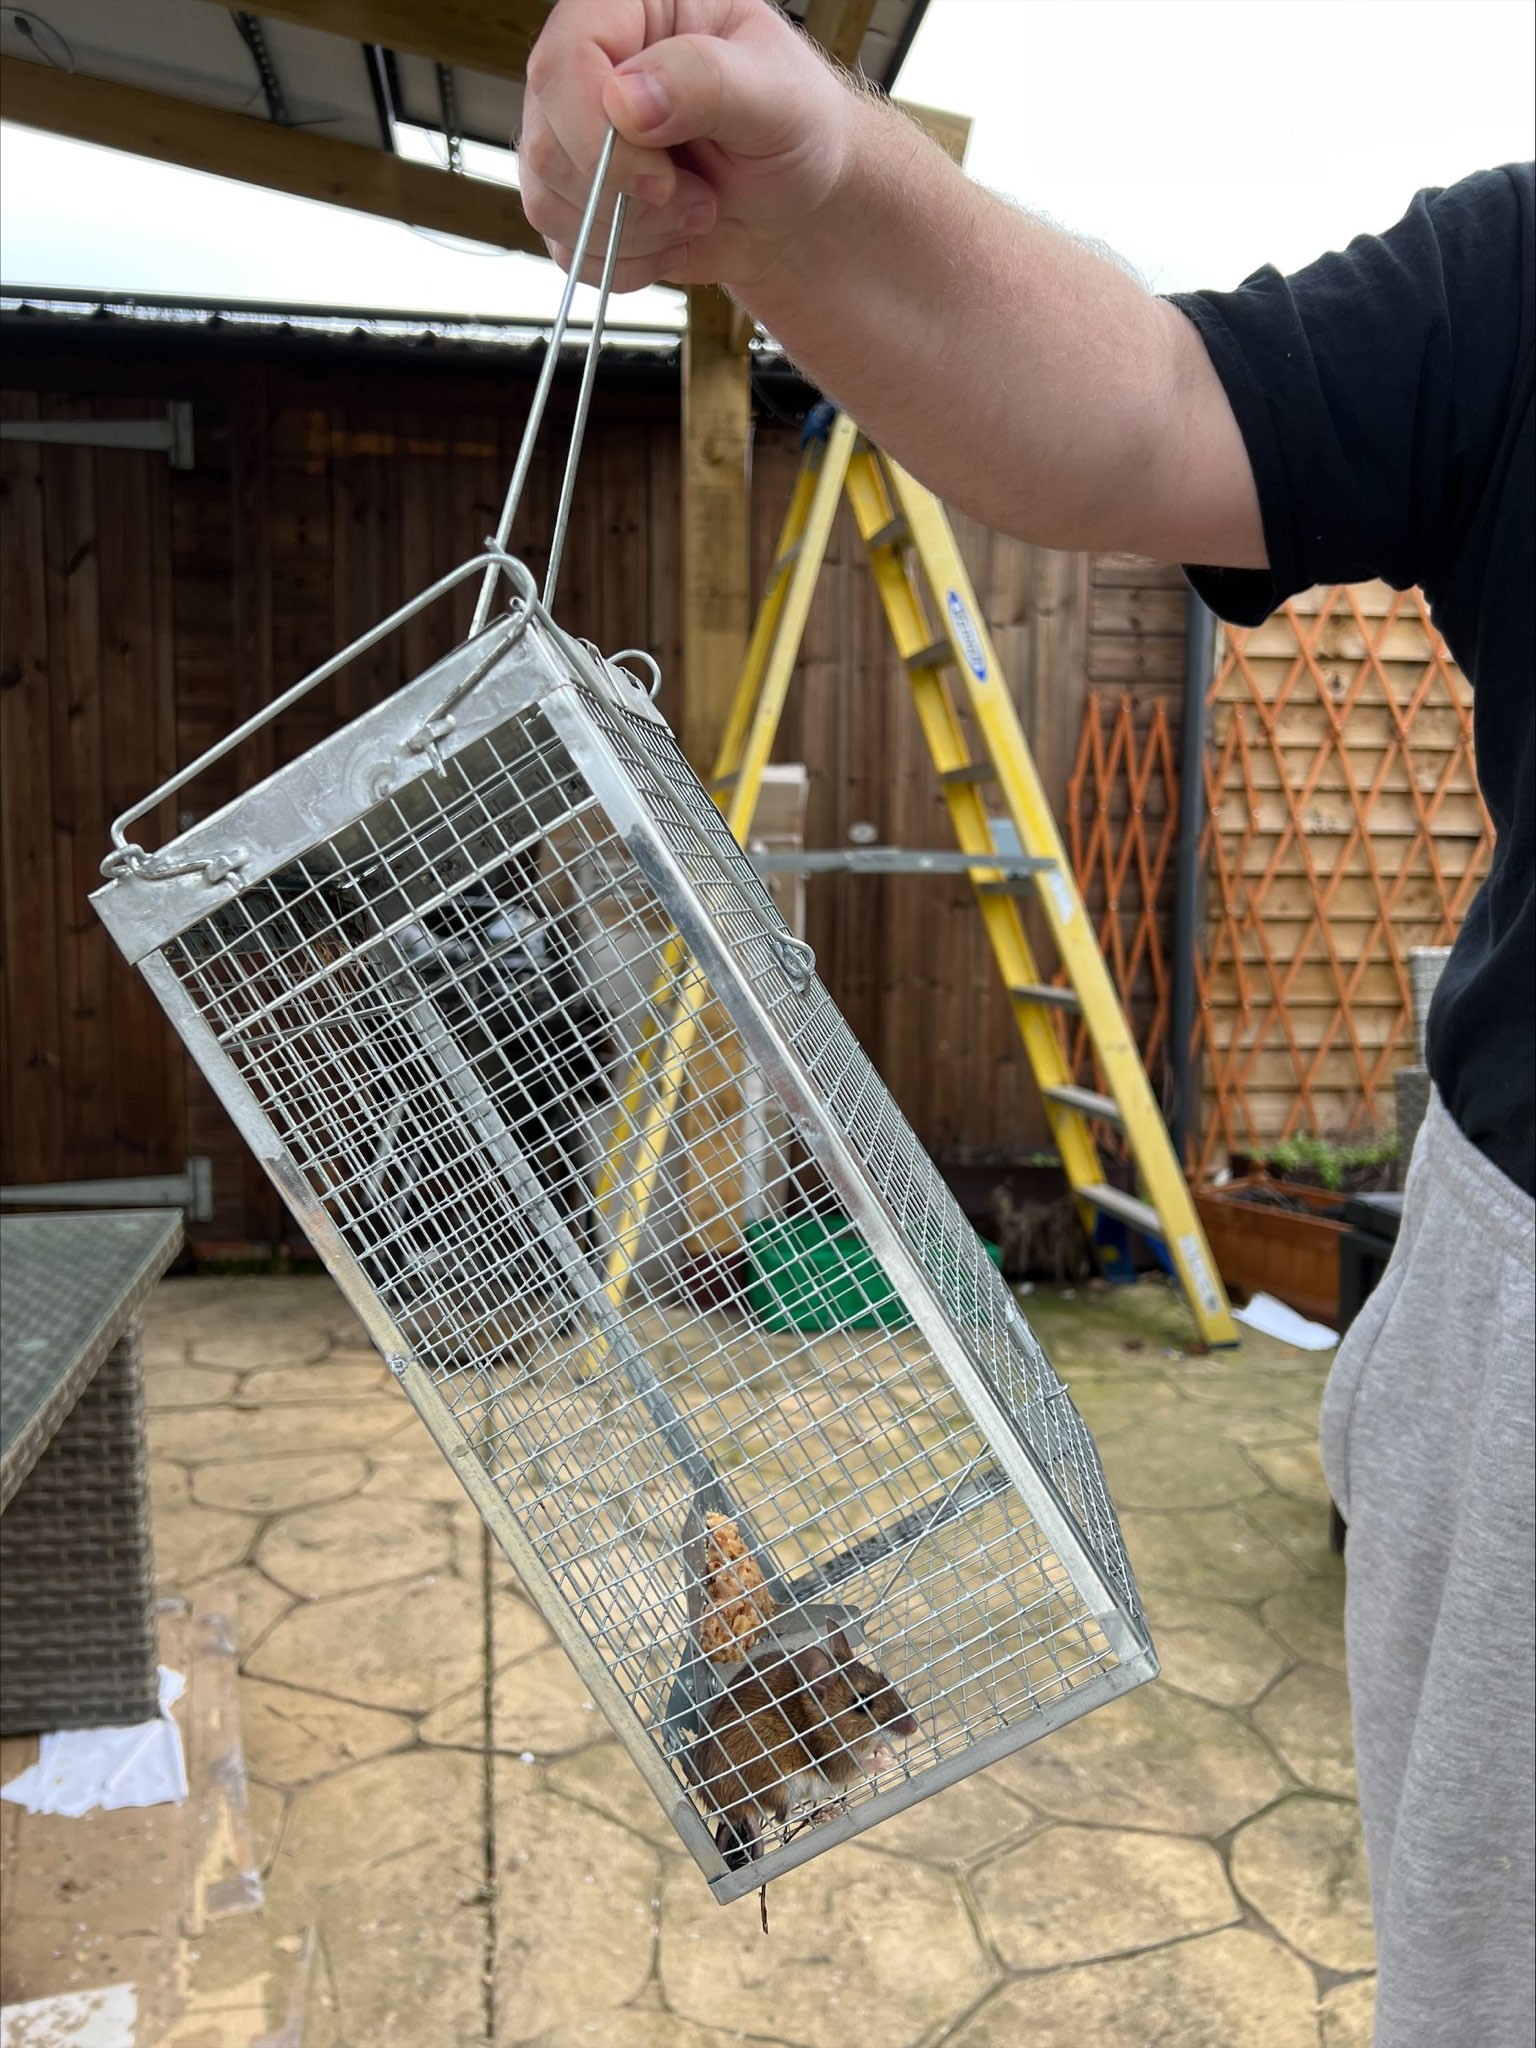 https://www.gardentoolbox.co.uk/wp-content/uploads/2023/01/Gingbau-Humane-Rat-Trap-me-demonstrating-how-it-can-be-held-by-the-trap-door-trigger-safely-as-to-avoid-contact-with-any-rodent.jpg